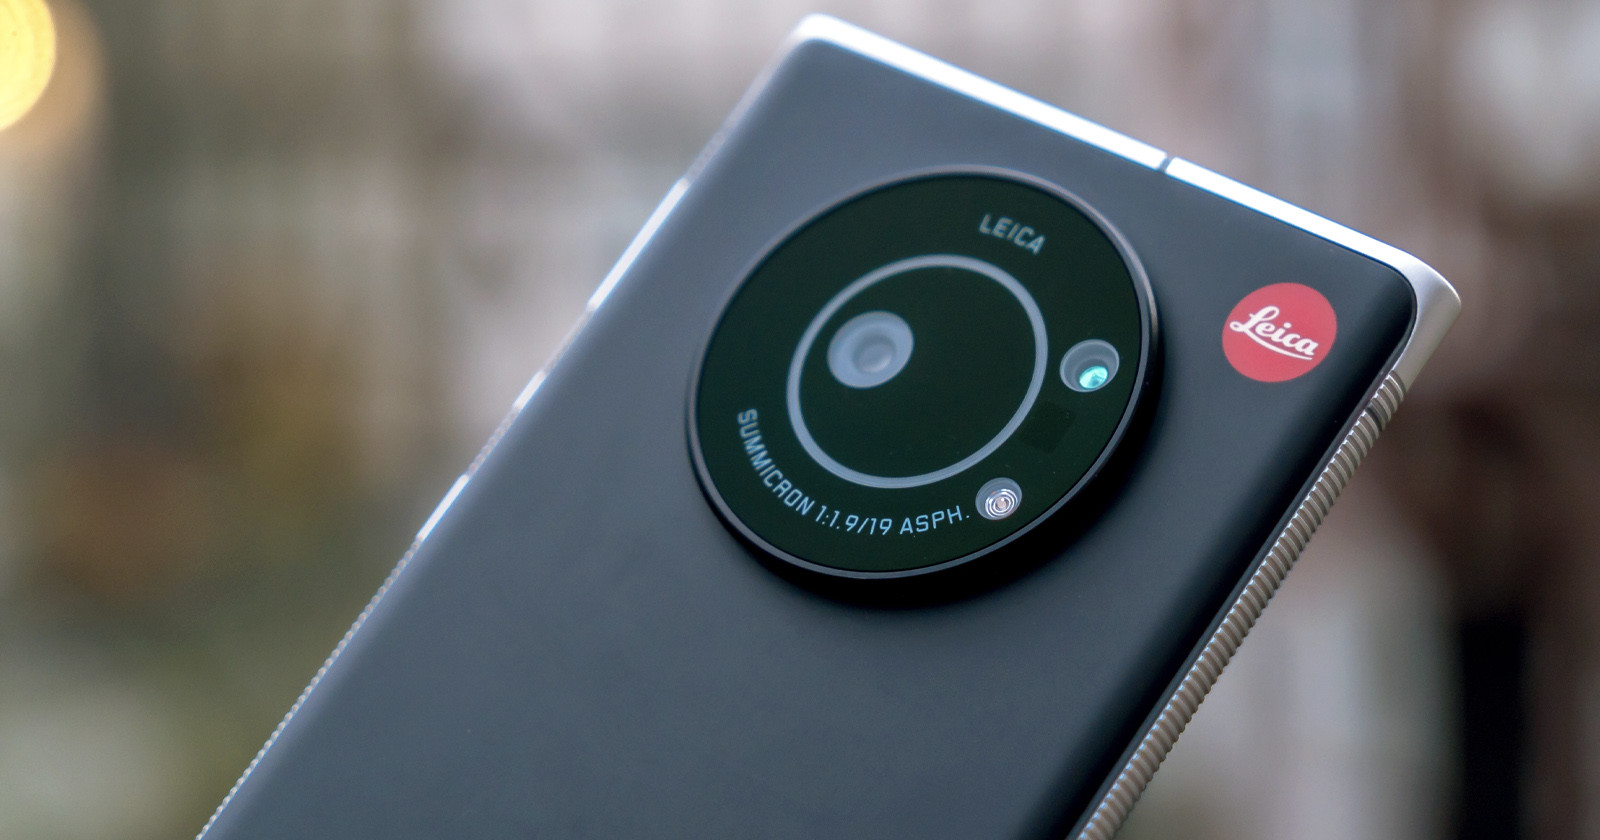 Leicas Leitz Phone 1: Why Arent More Camera Companies Making Phones?